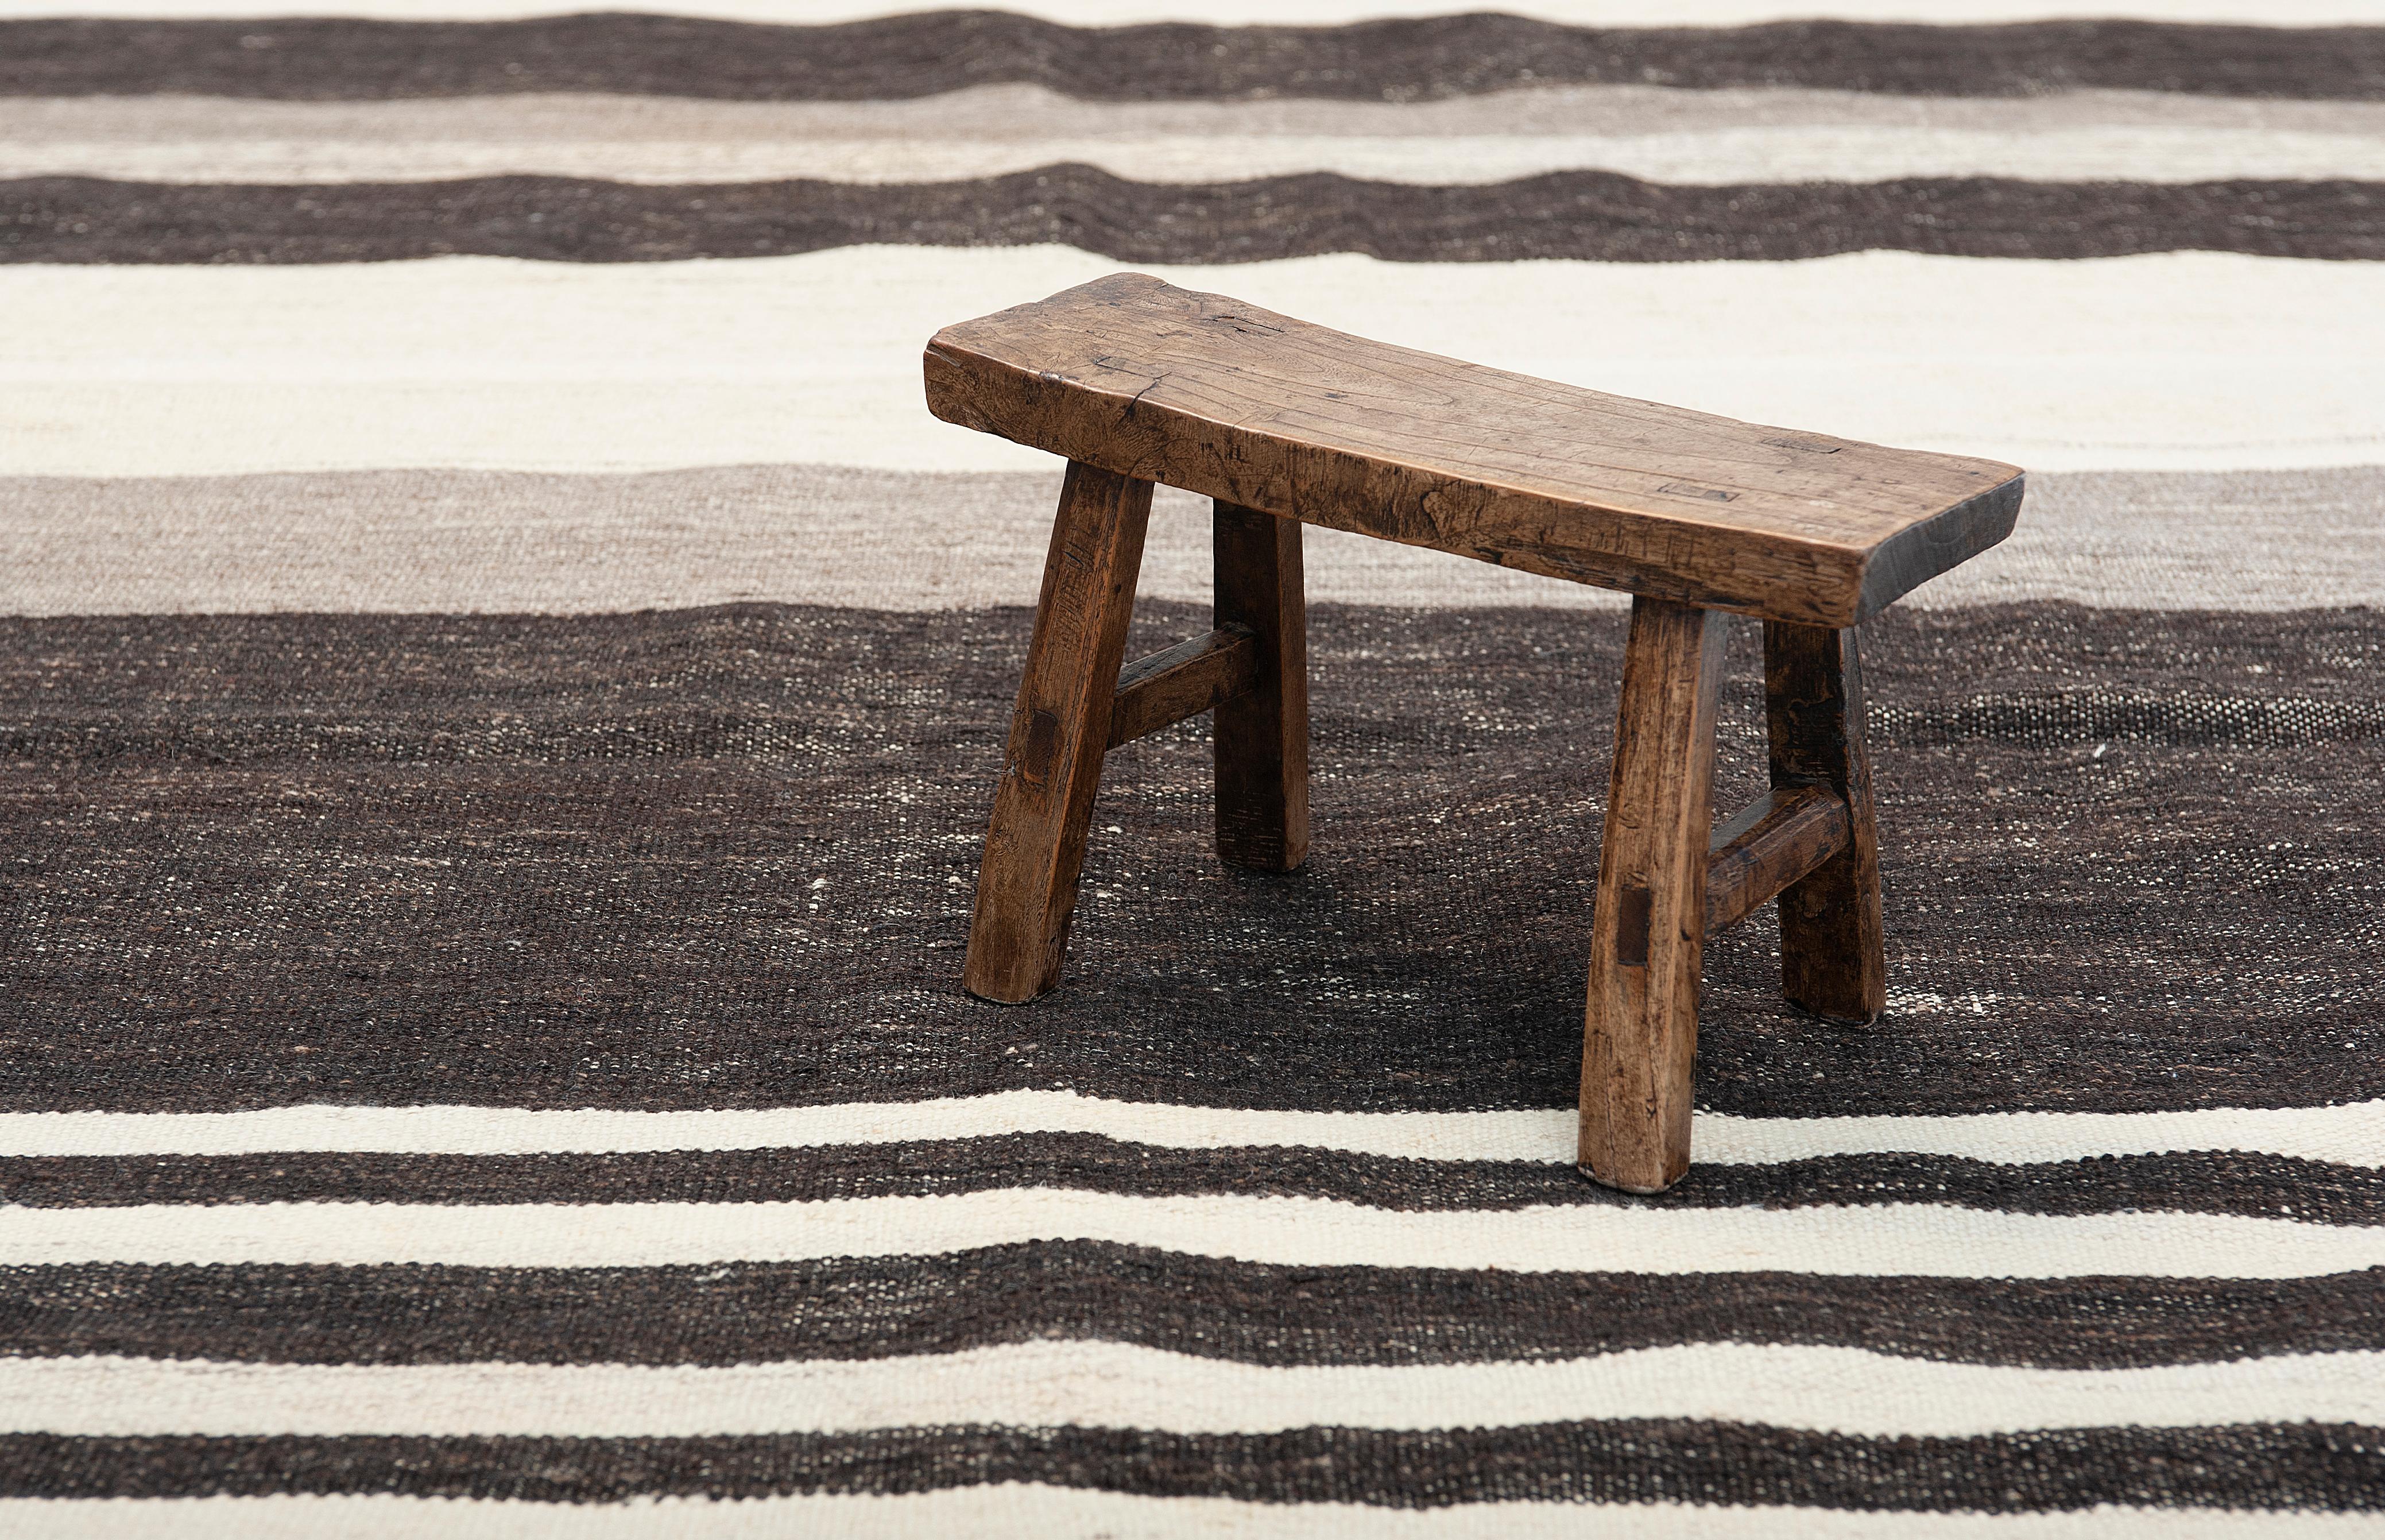 A vintage runner weaved in contrasting neutral tones, with seamless transitions of stripes that would transform any space with its warm and fresh appeal. This powerful statement piece captures all the essence, beauty and simplicity of a Kilim.